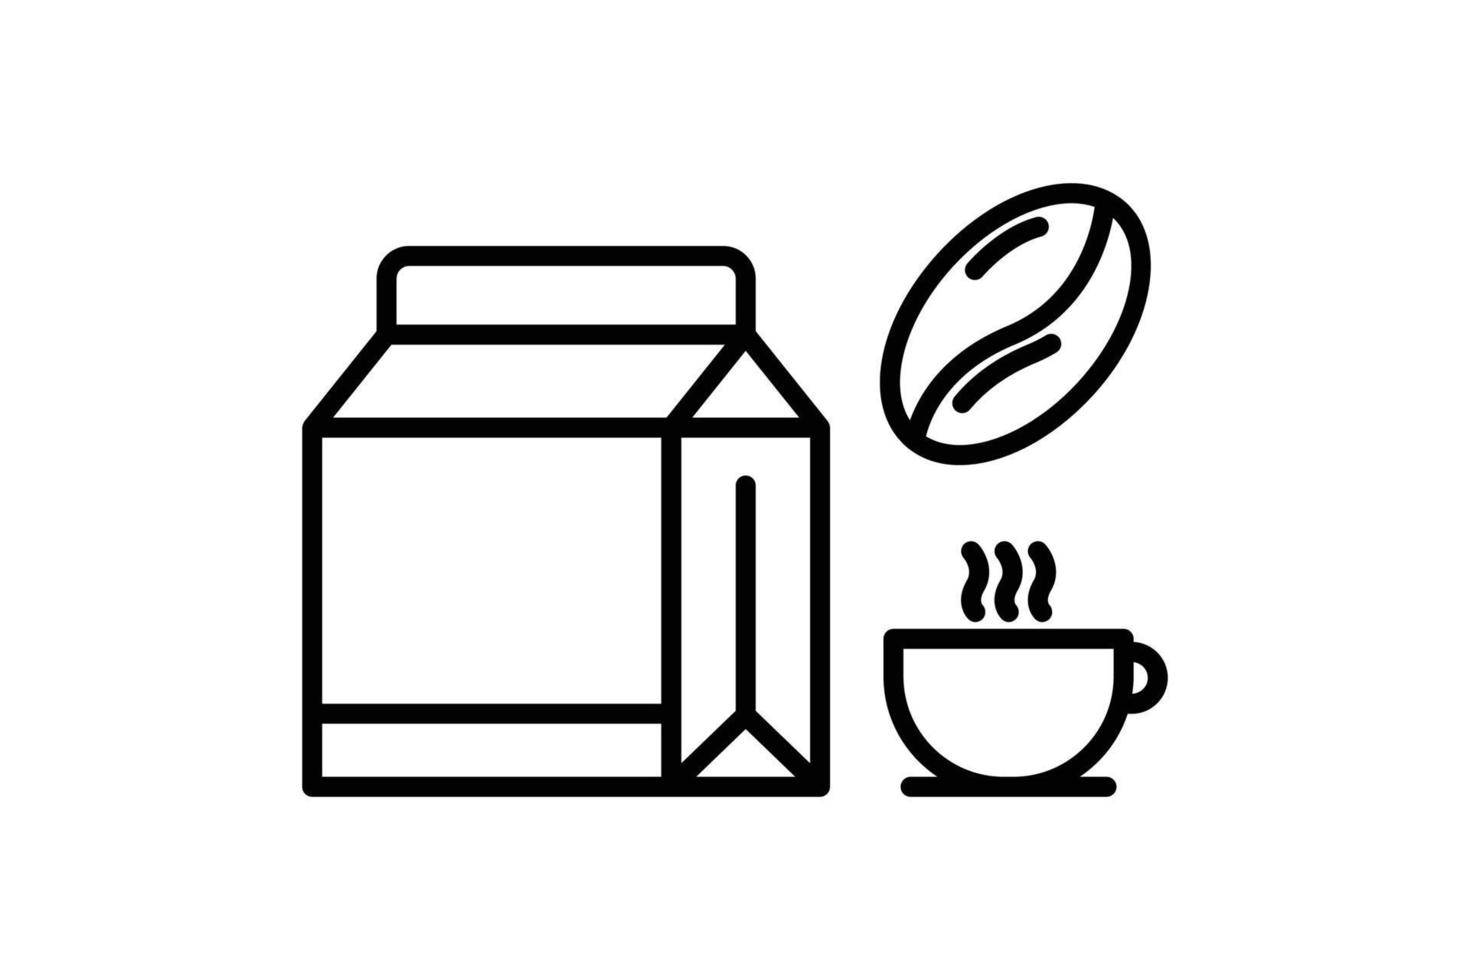 Coffee bag icon with coffee cup and coffee beans. icon related to coffee element. Line icon style. Simple vector design editable